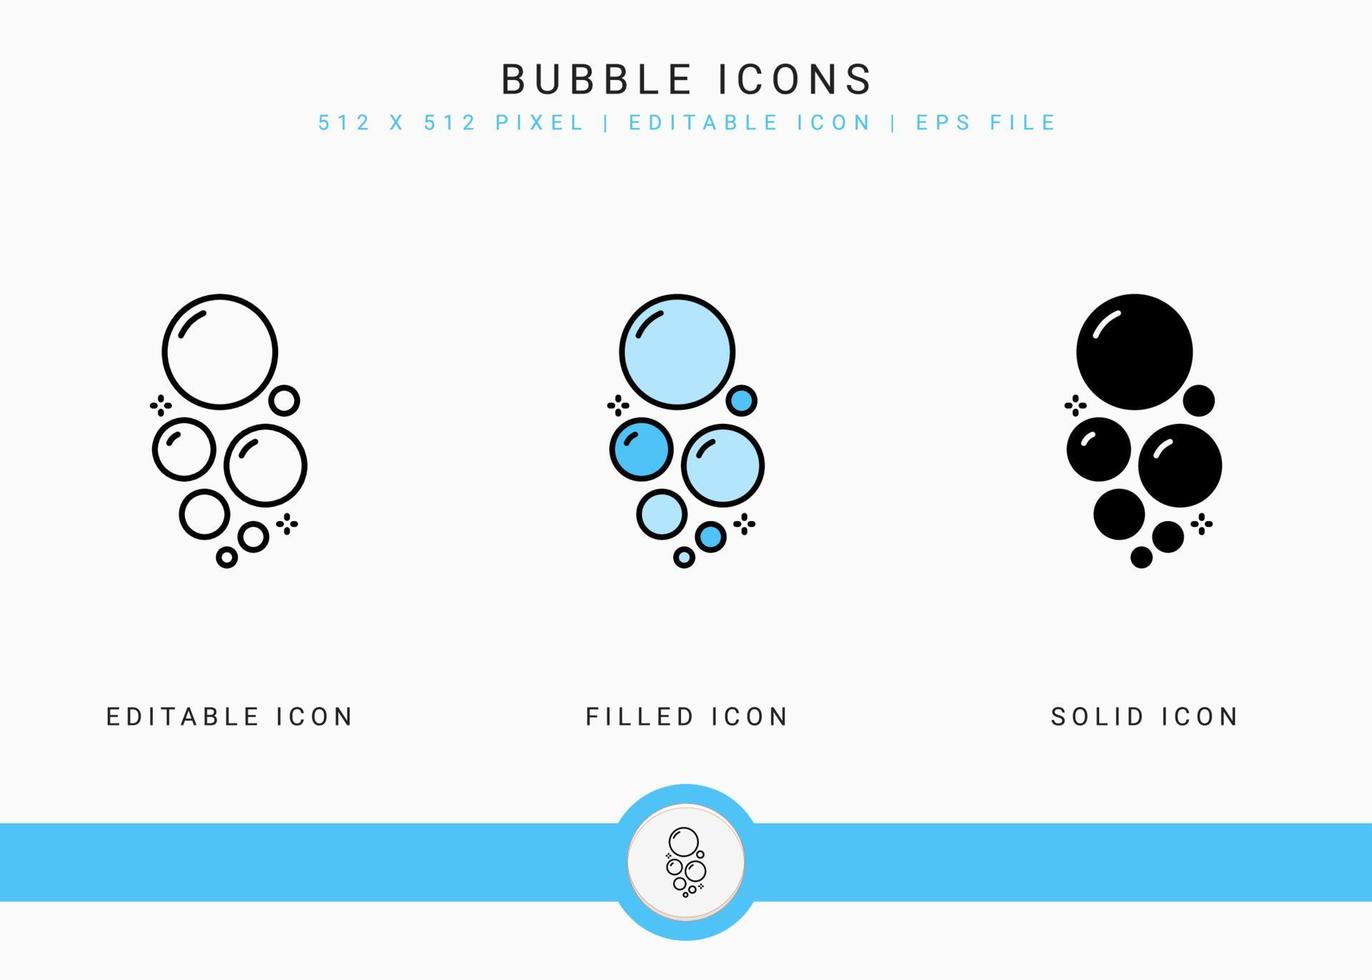 Bubble icons set vector illustration with solid icon line style. Effervescent soap foam concept. Editable stroke icon on isolated background for web design, infographic and UI mobile app.